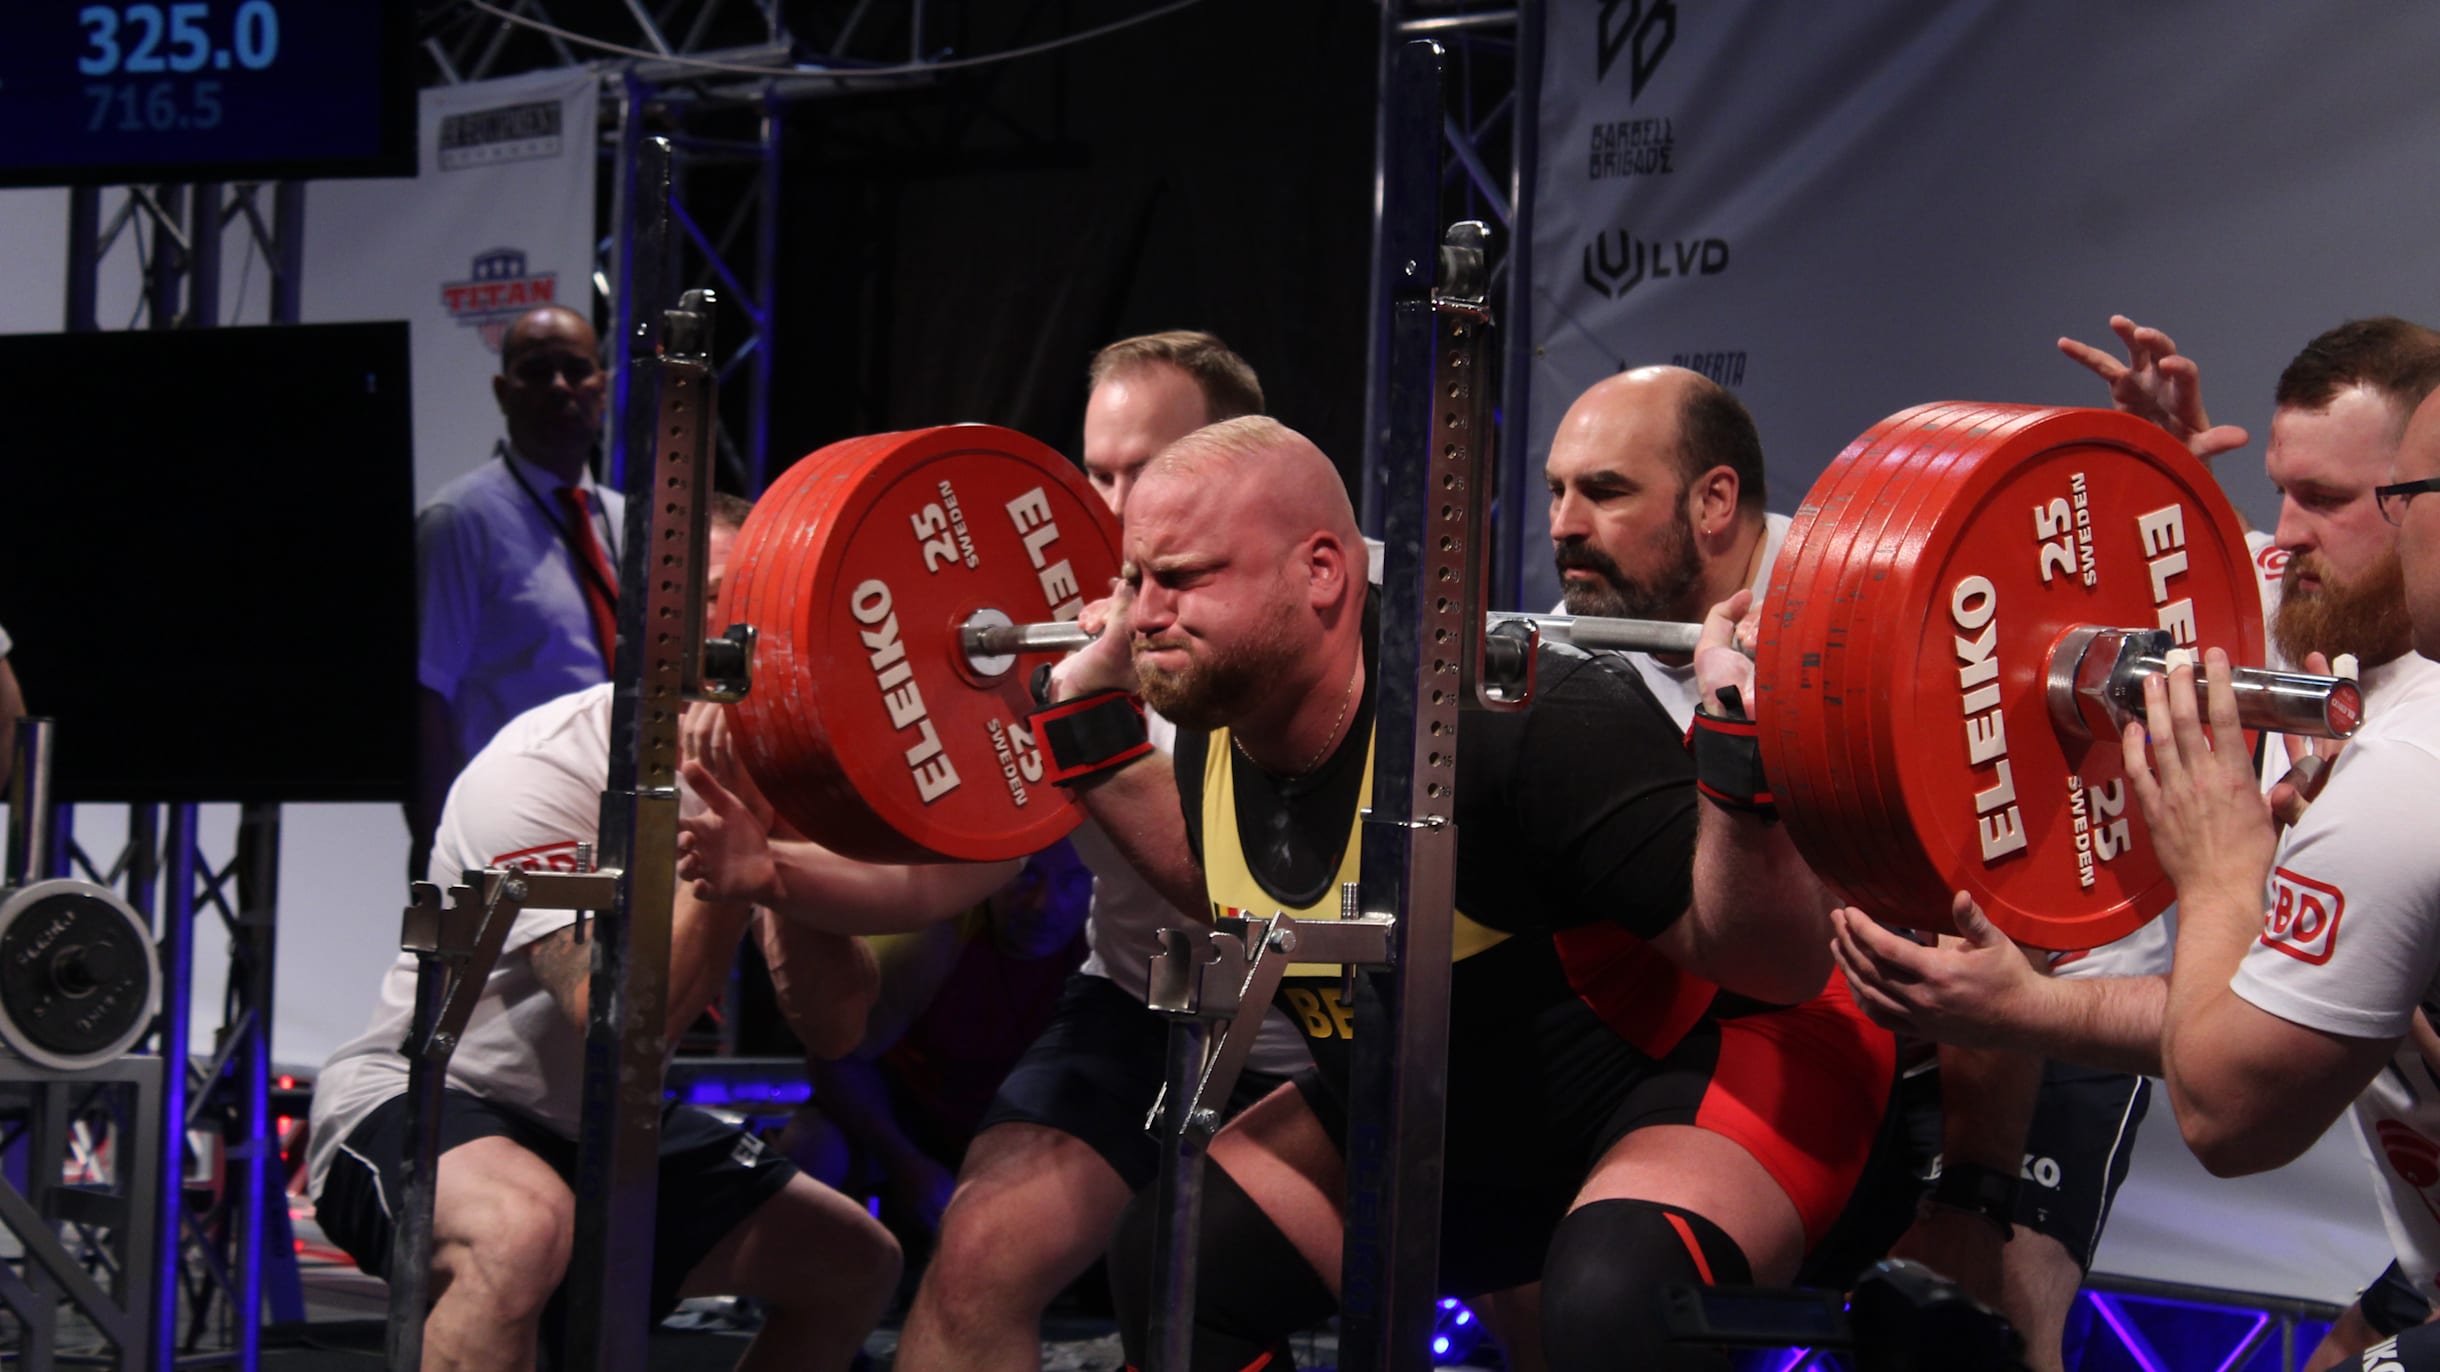 US OPEN Results - POWERLIFTING MOTIVATIONPOWERLIFTING MOTIVATION